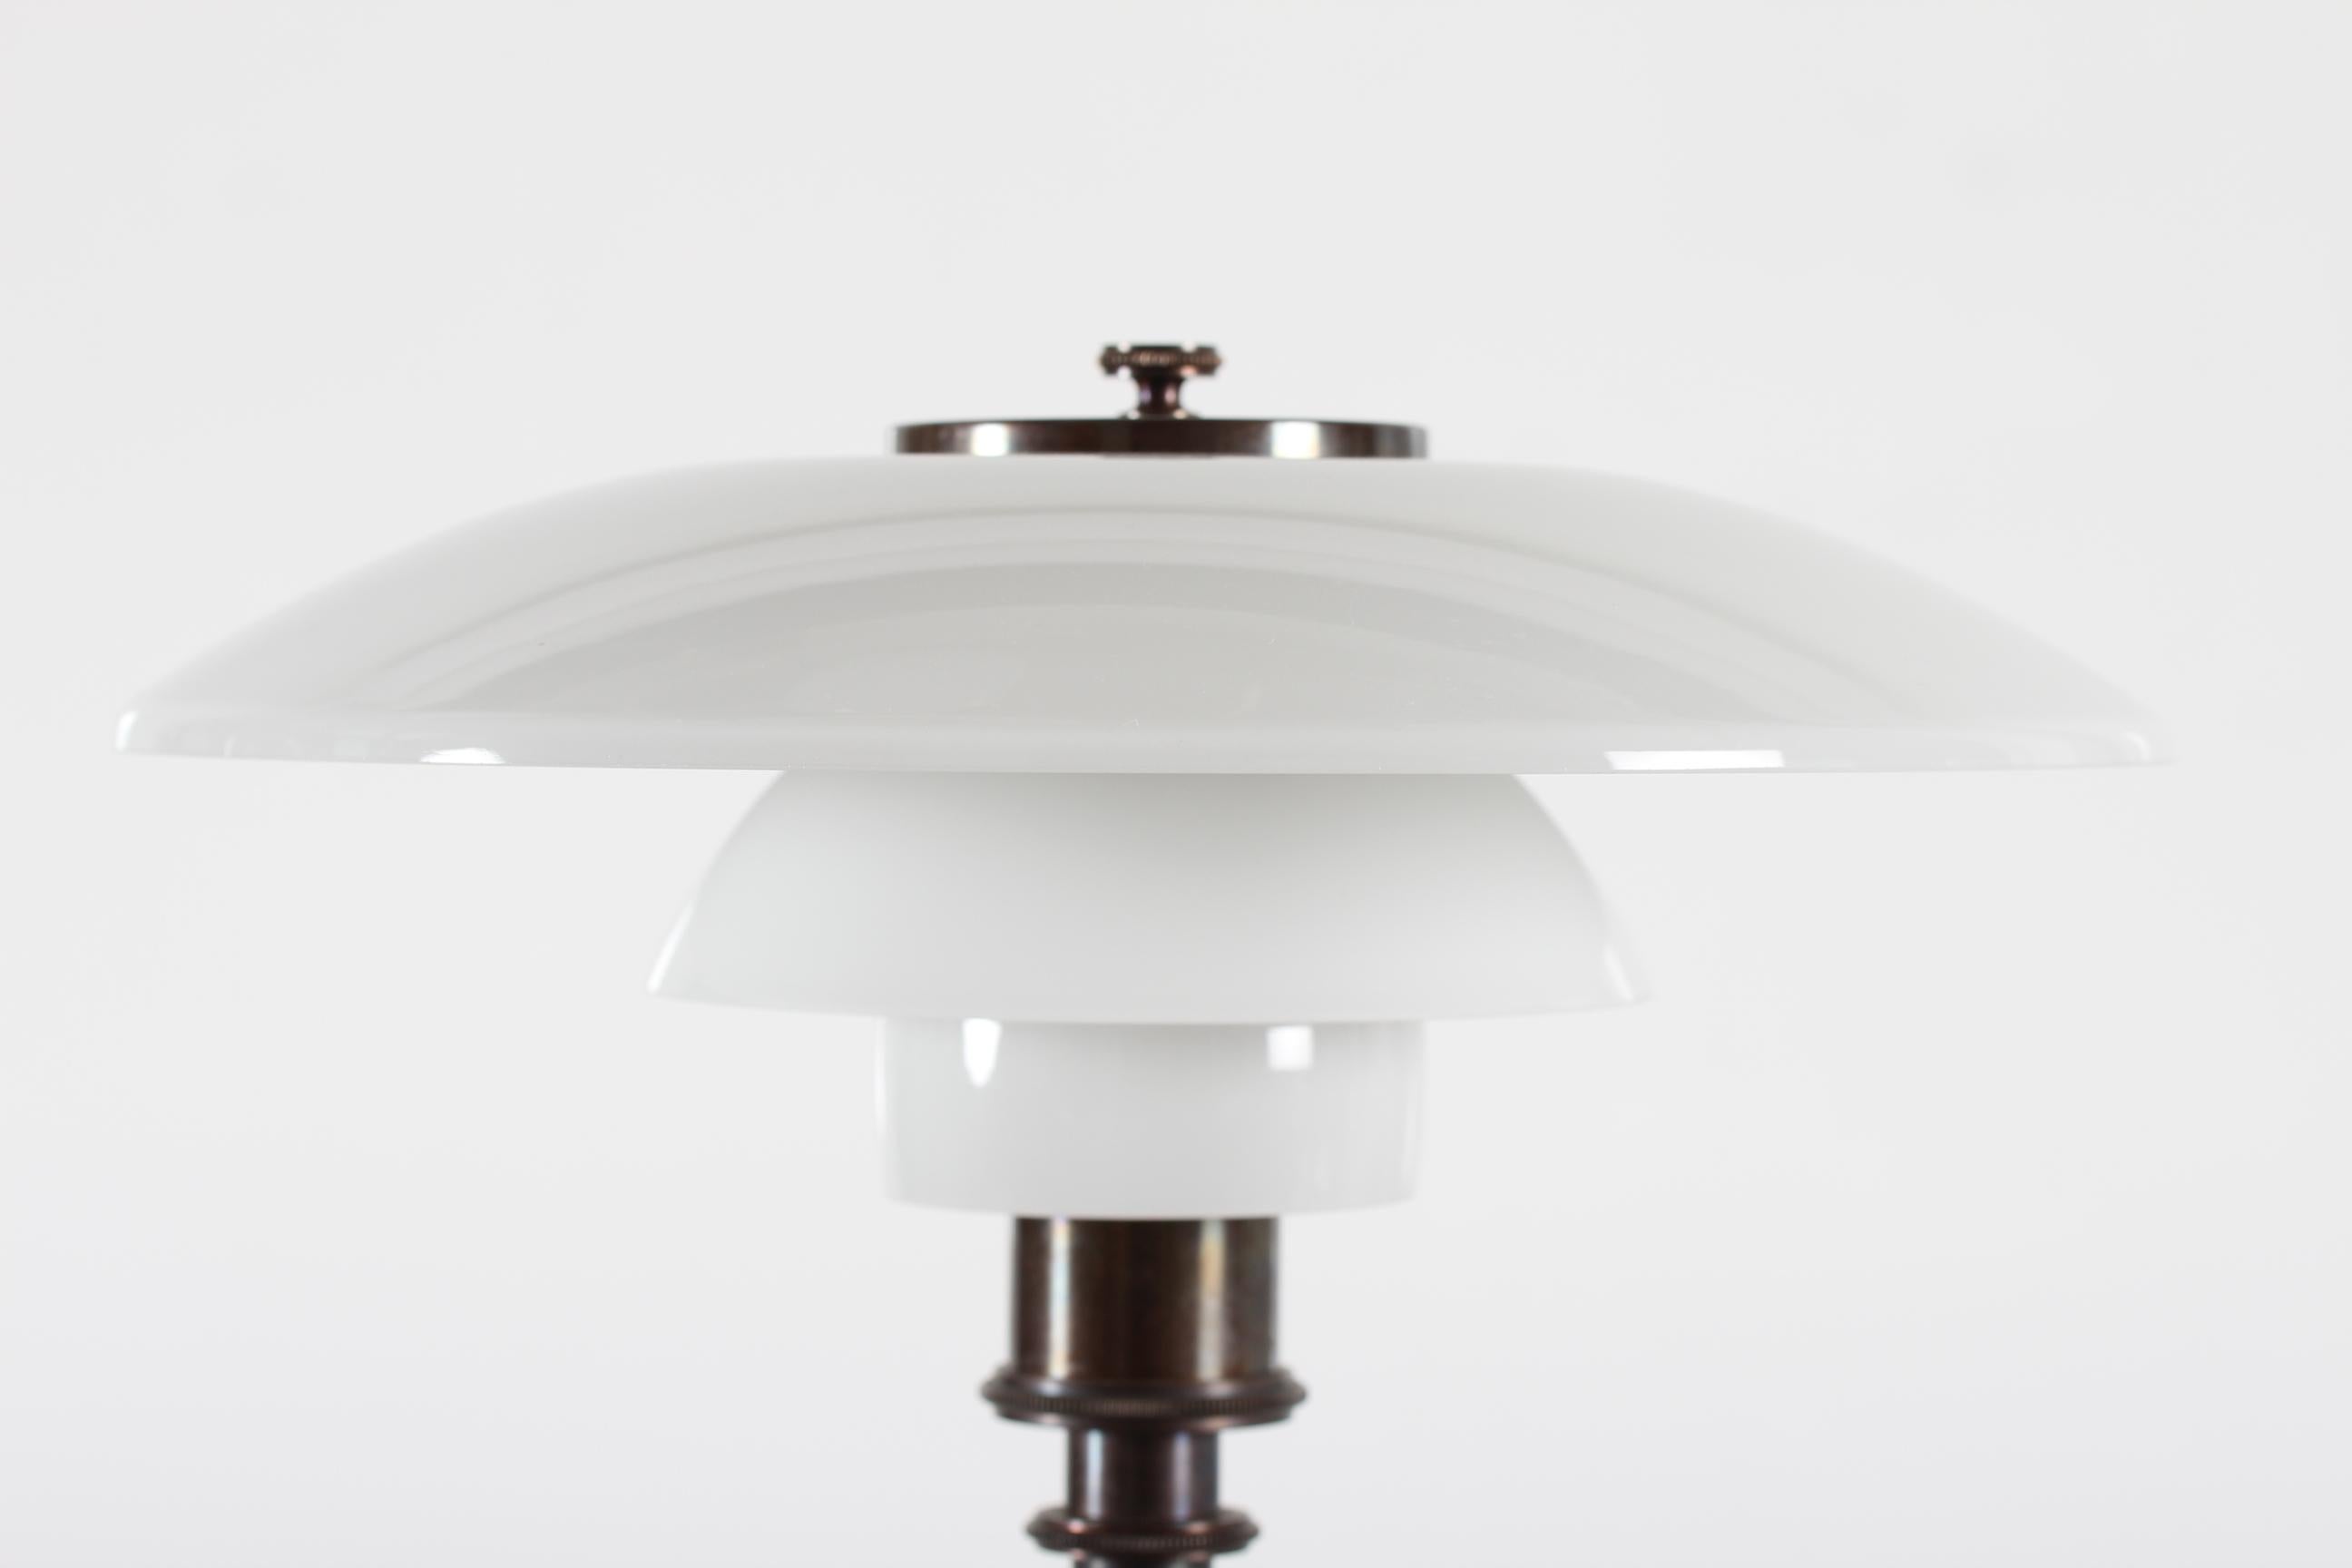 Vintage Poul Henningsen table lamp model trePH PH 3/2 special anniversary edition from 1994.
The lamp was designed by the Danish designer Poul Henningsen
It was made in 1994 as a special edition on the occasion of his 100 birthday. 
PH was born